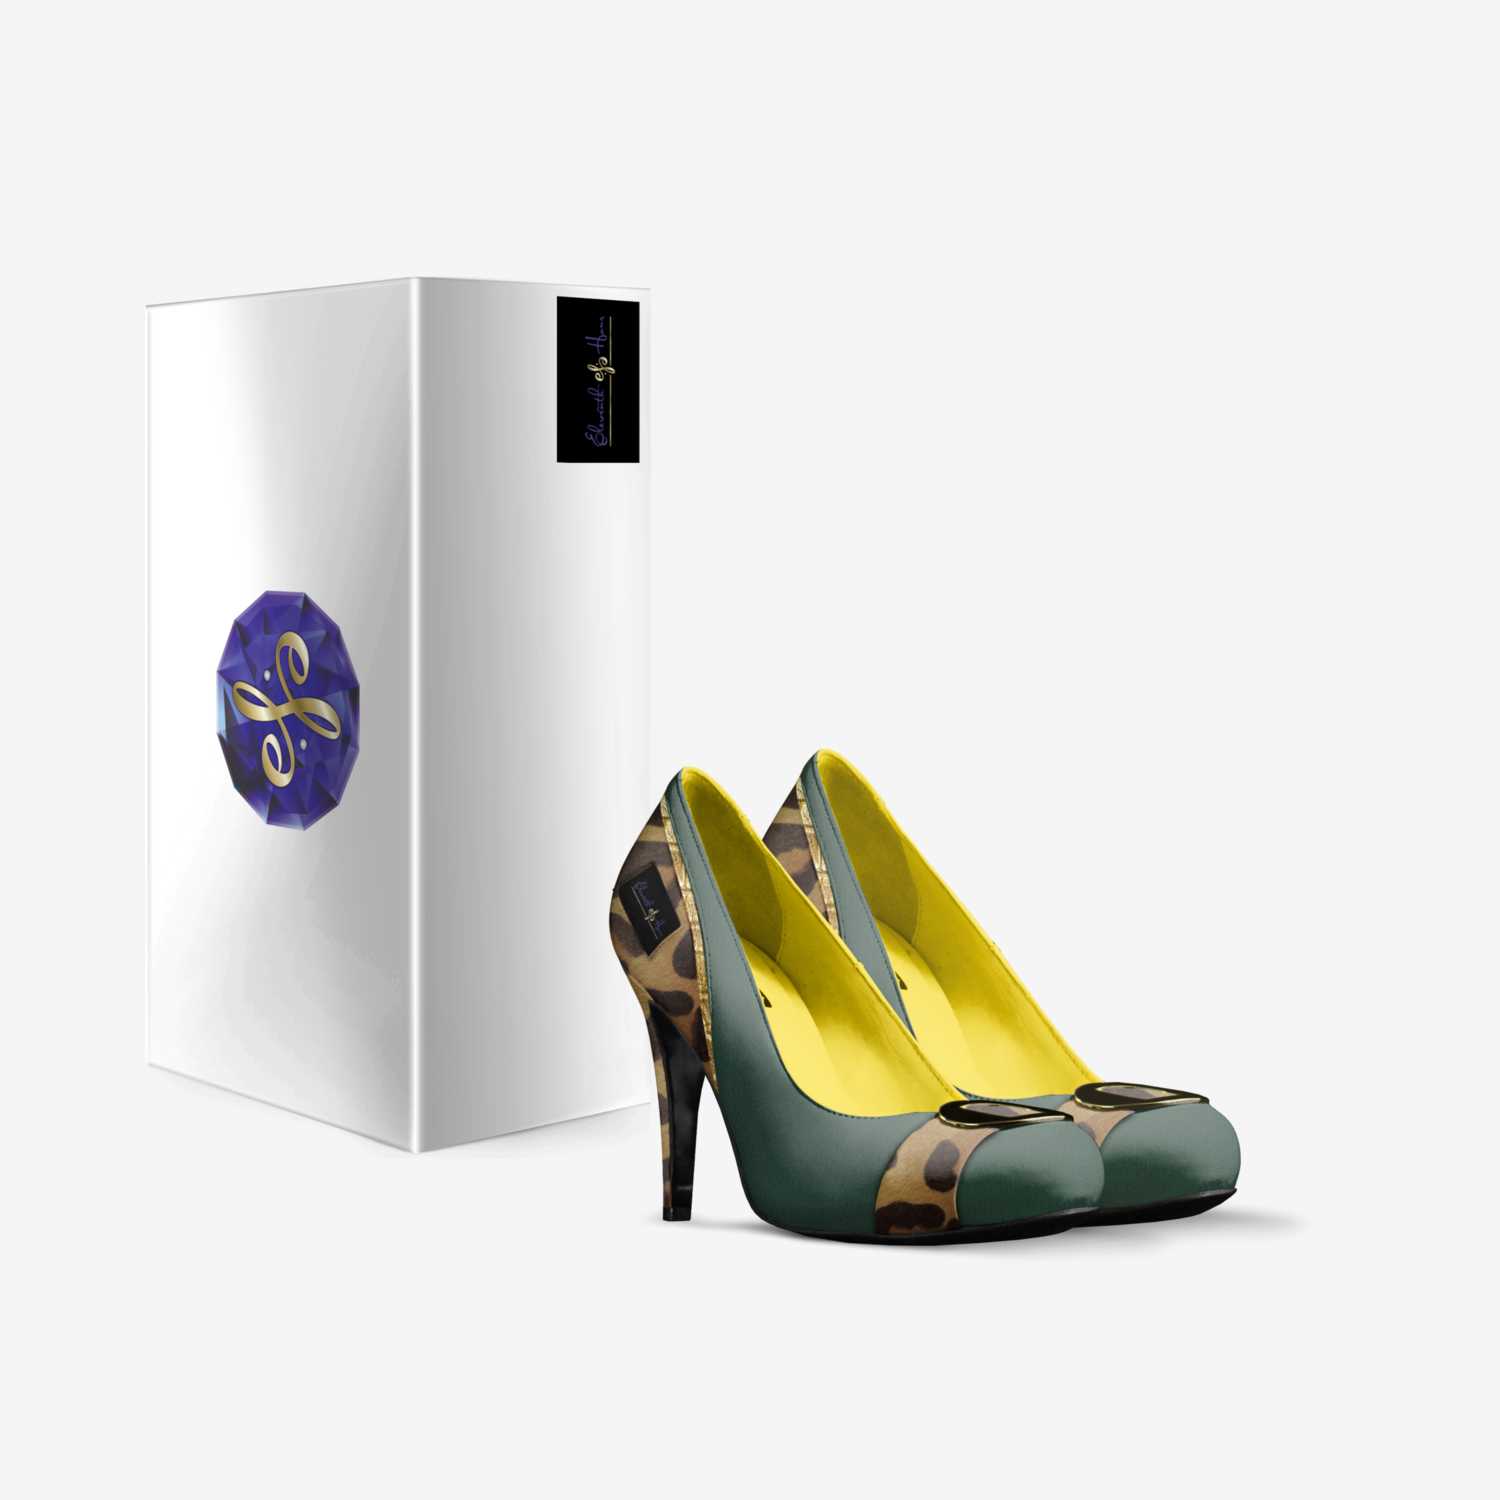 eleven:eleven custom made in Italy shoes by Elvira Camacho-hernandez | Box view